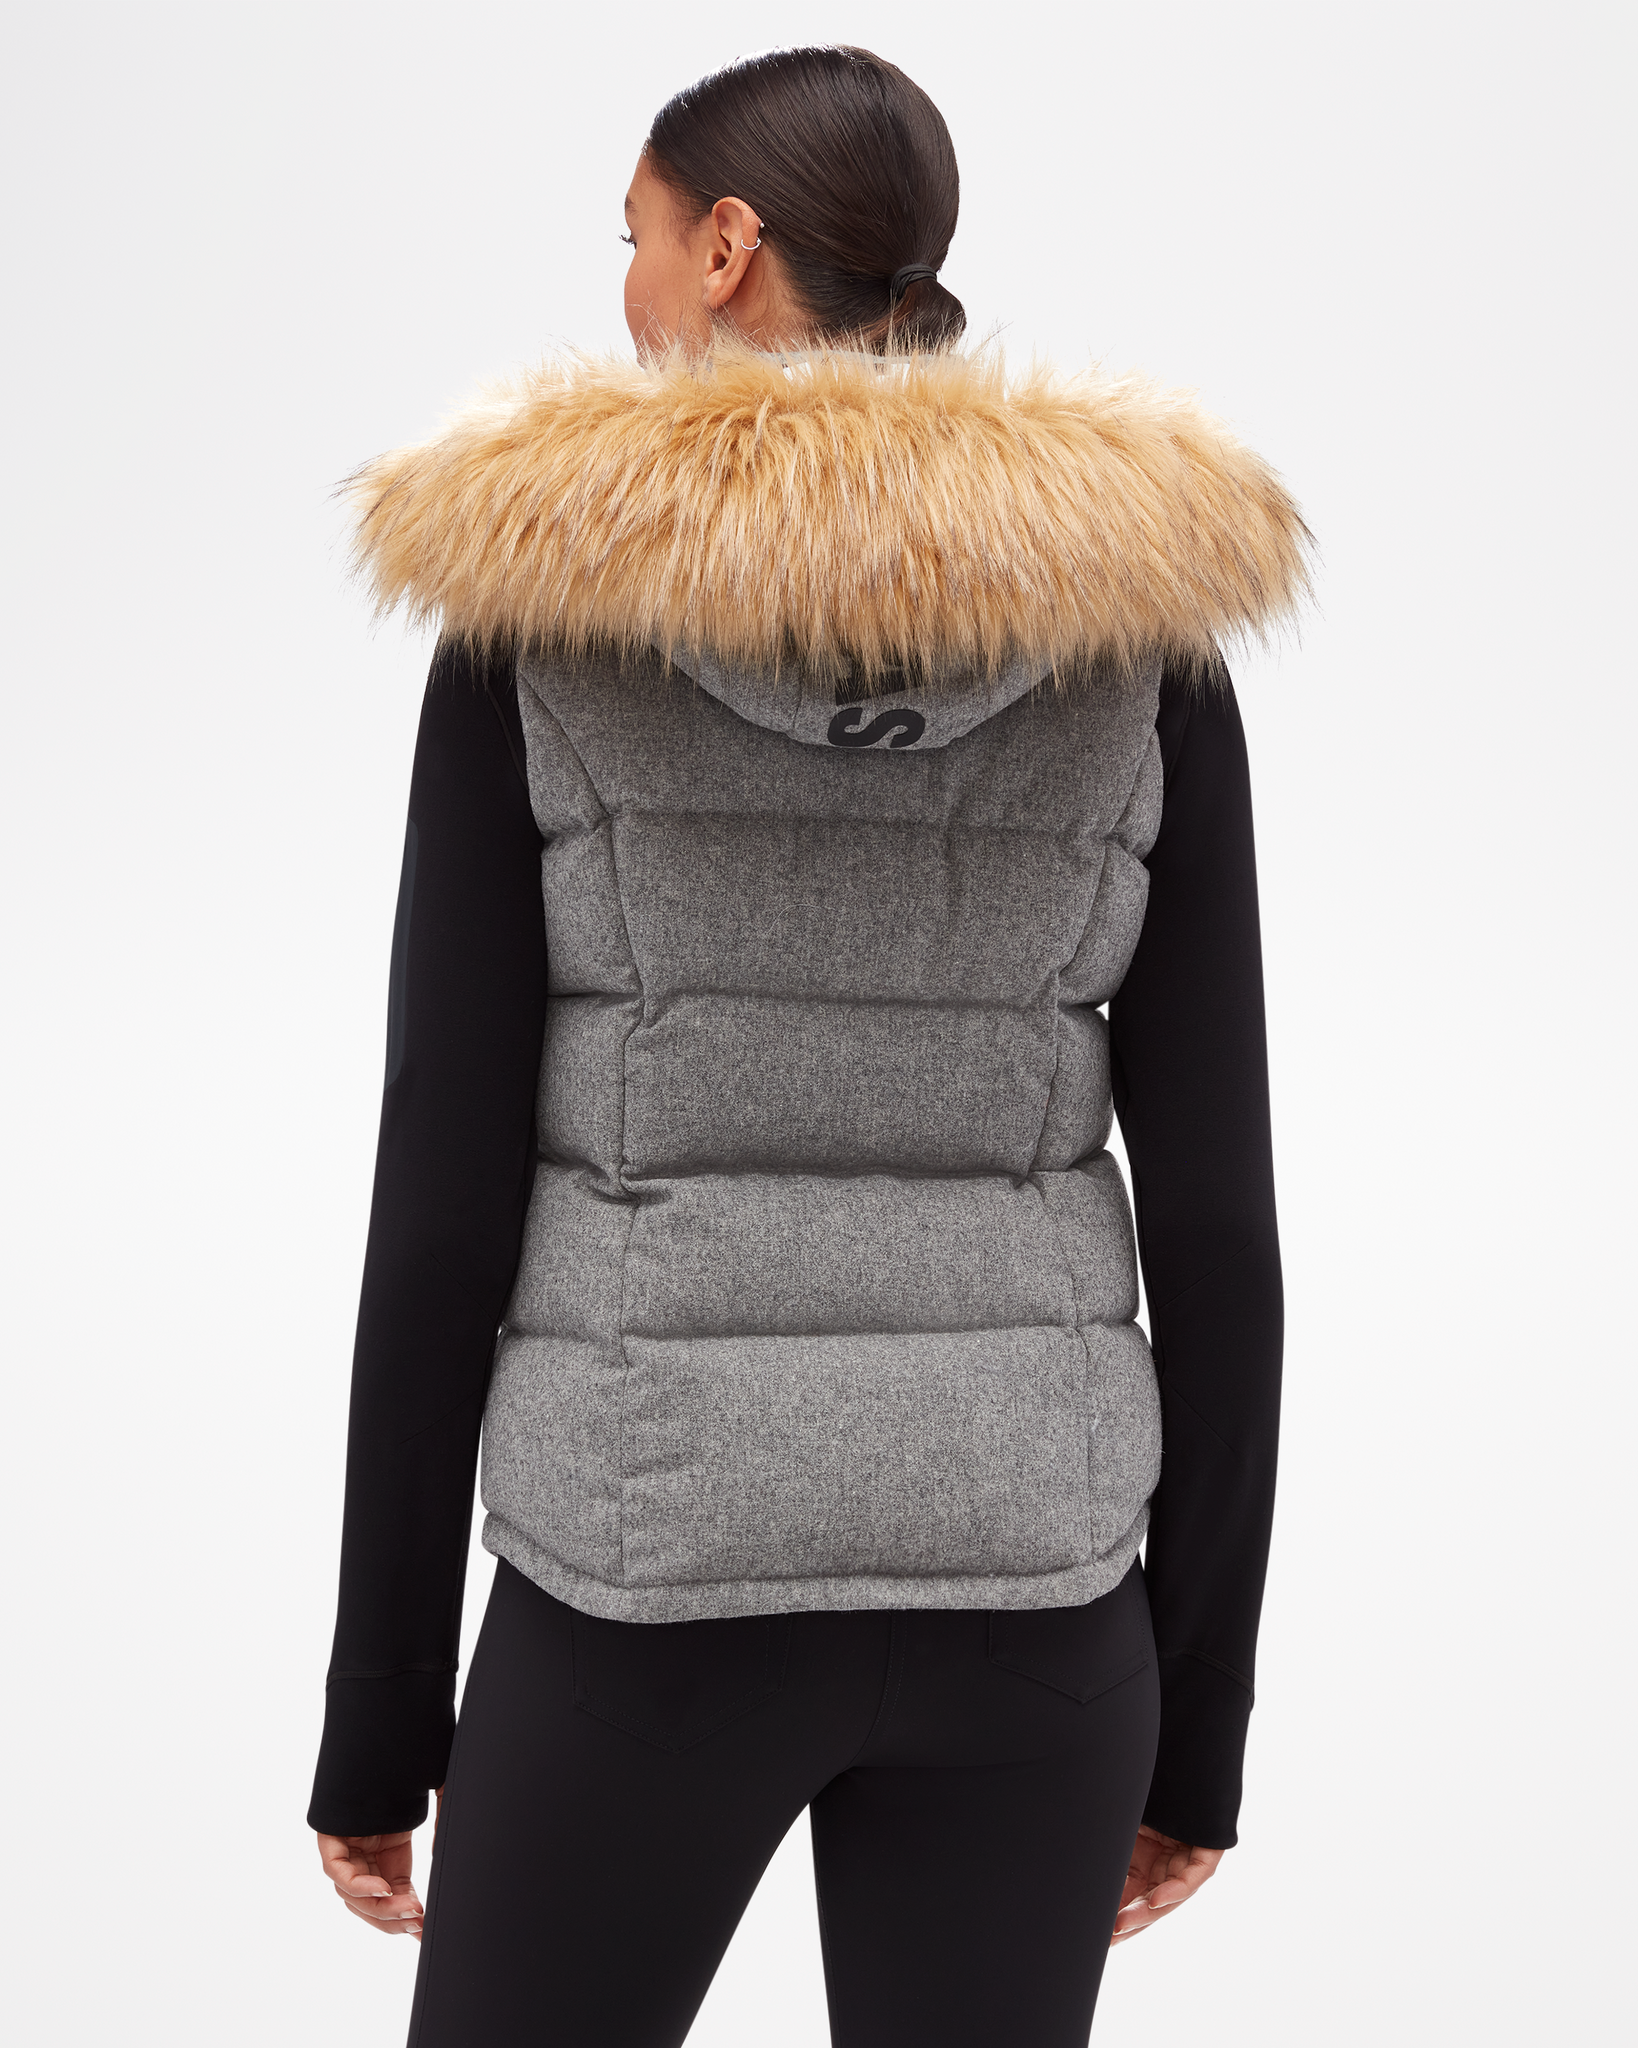 Casual and Stylish Merino Wool Vests for Women, Blake by Woolx